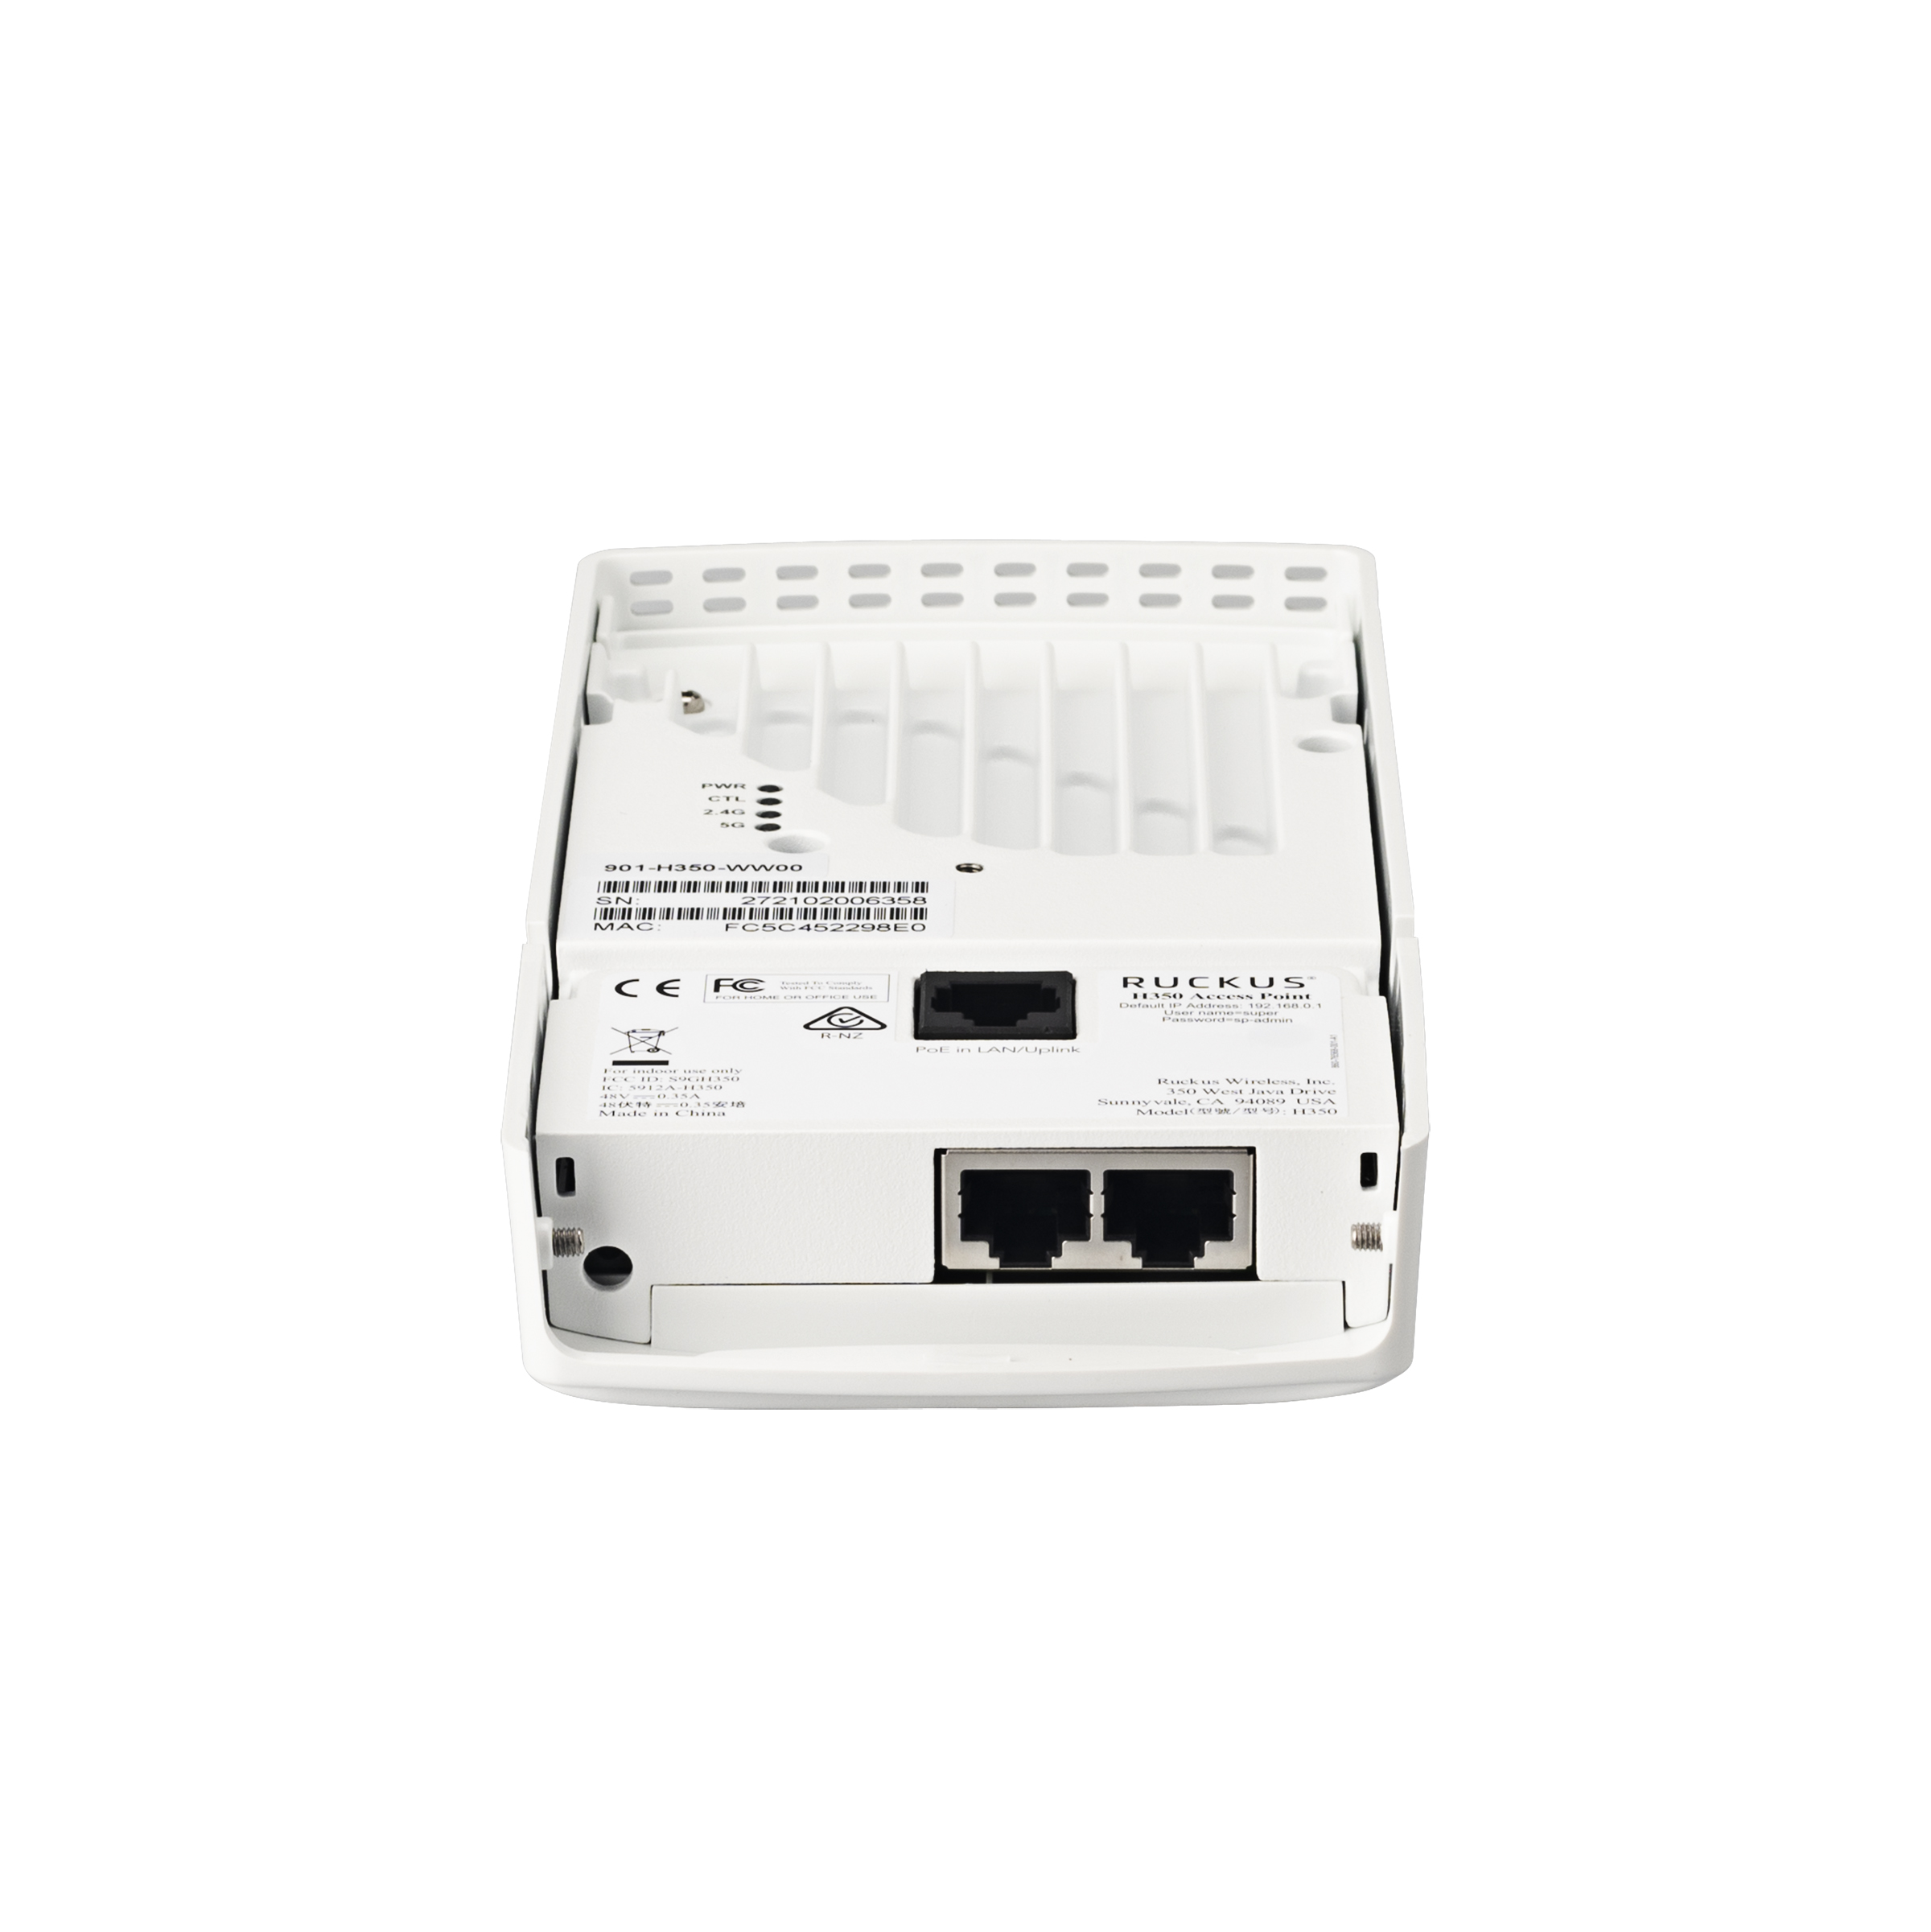 Ruckus H350 Indoor Access Point - Unleashed